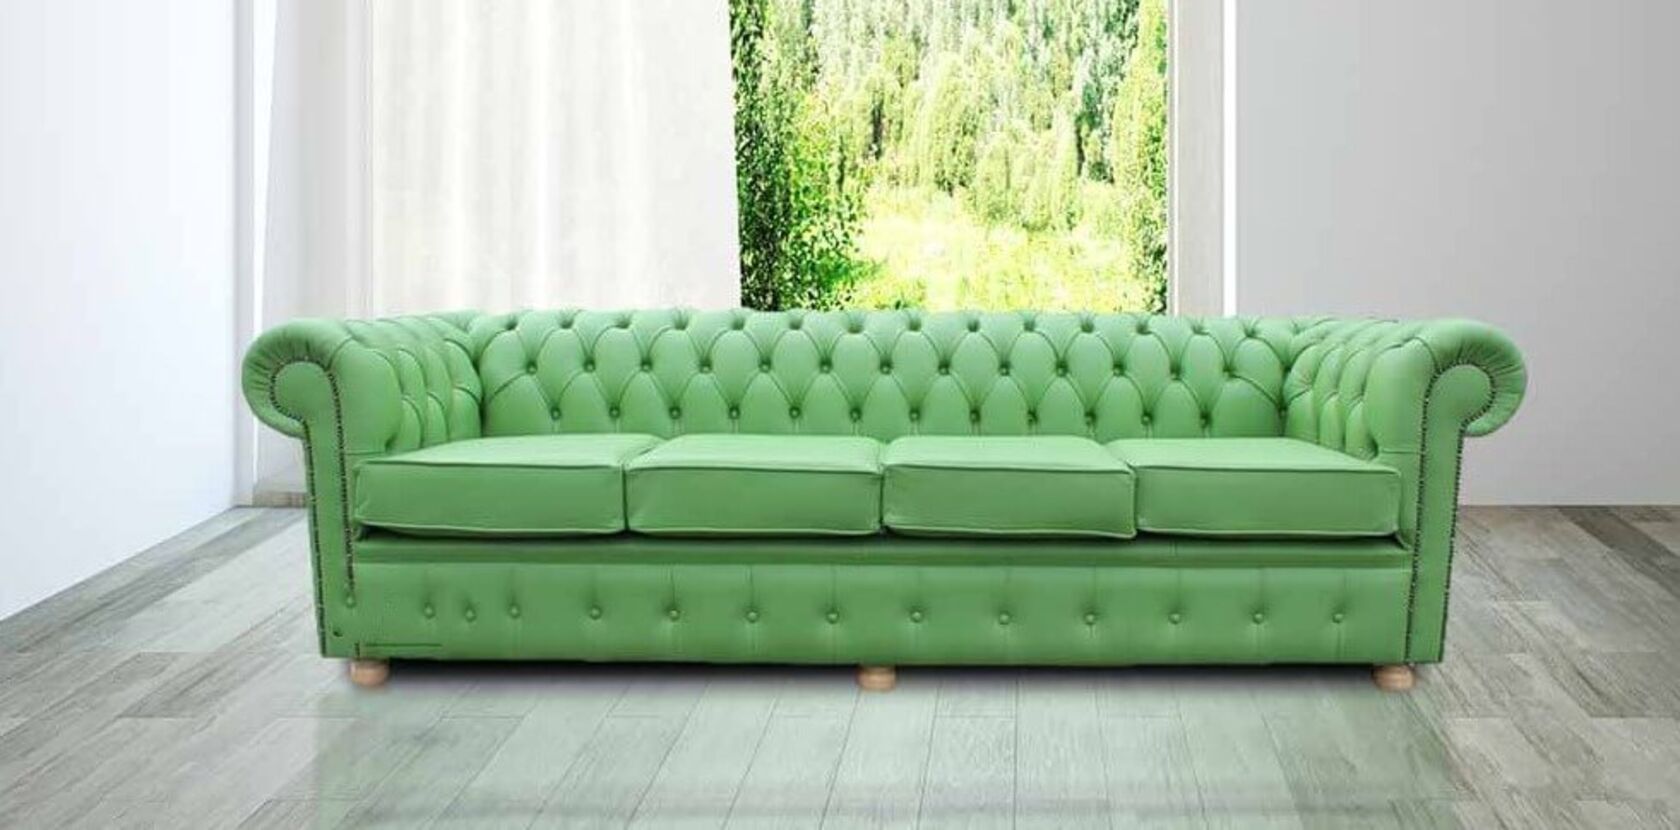 Apple Green Leather Chesterfield Sofa, Lime Green Leather Sofa